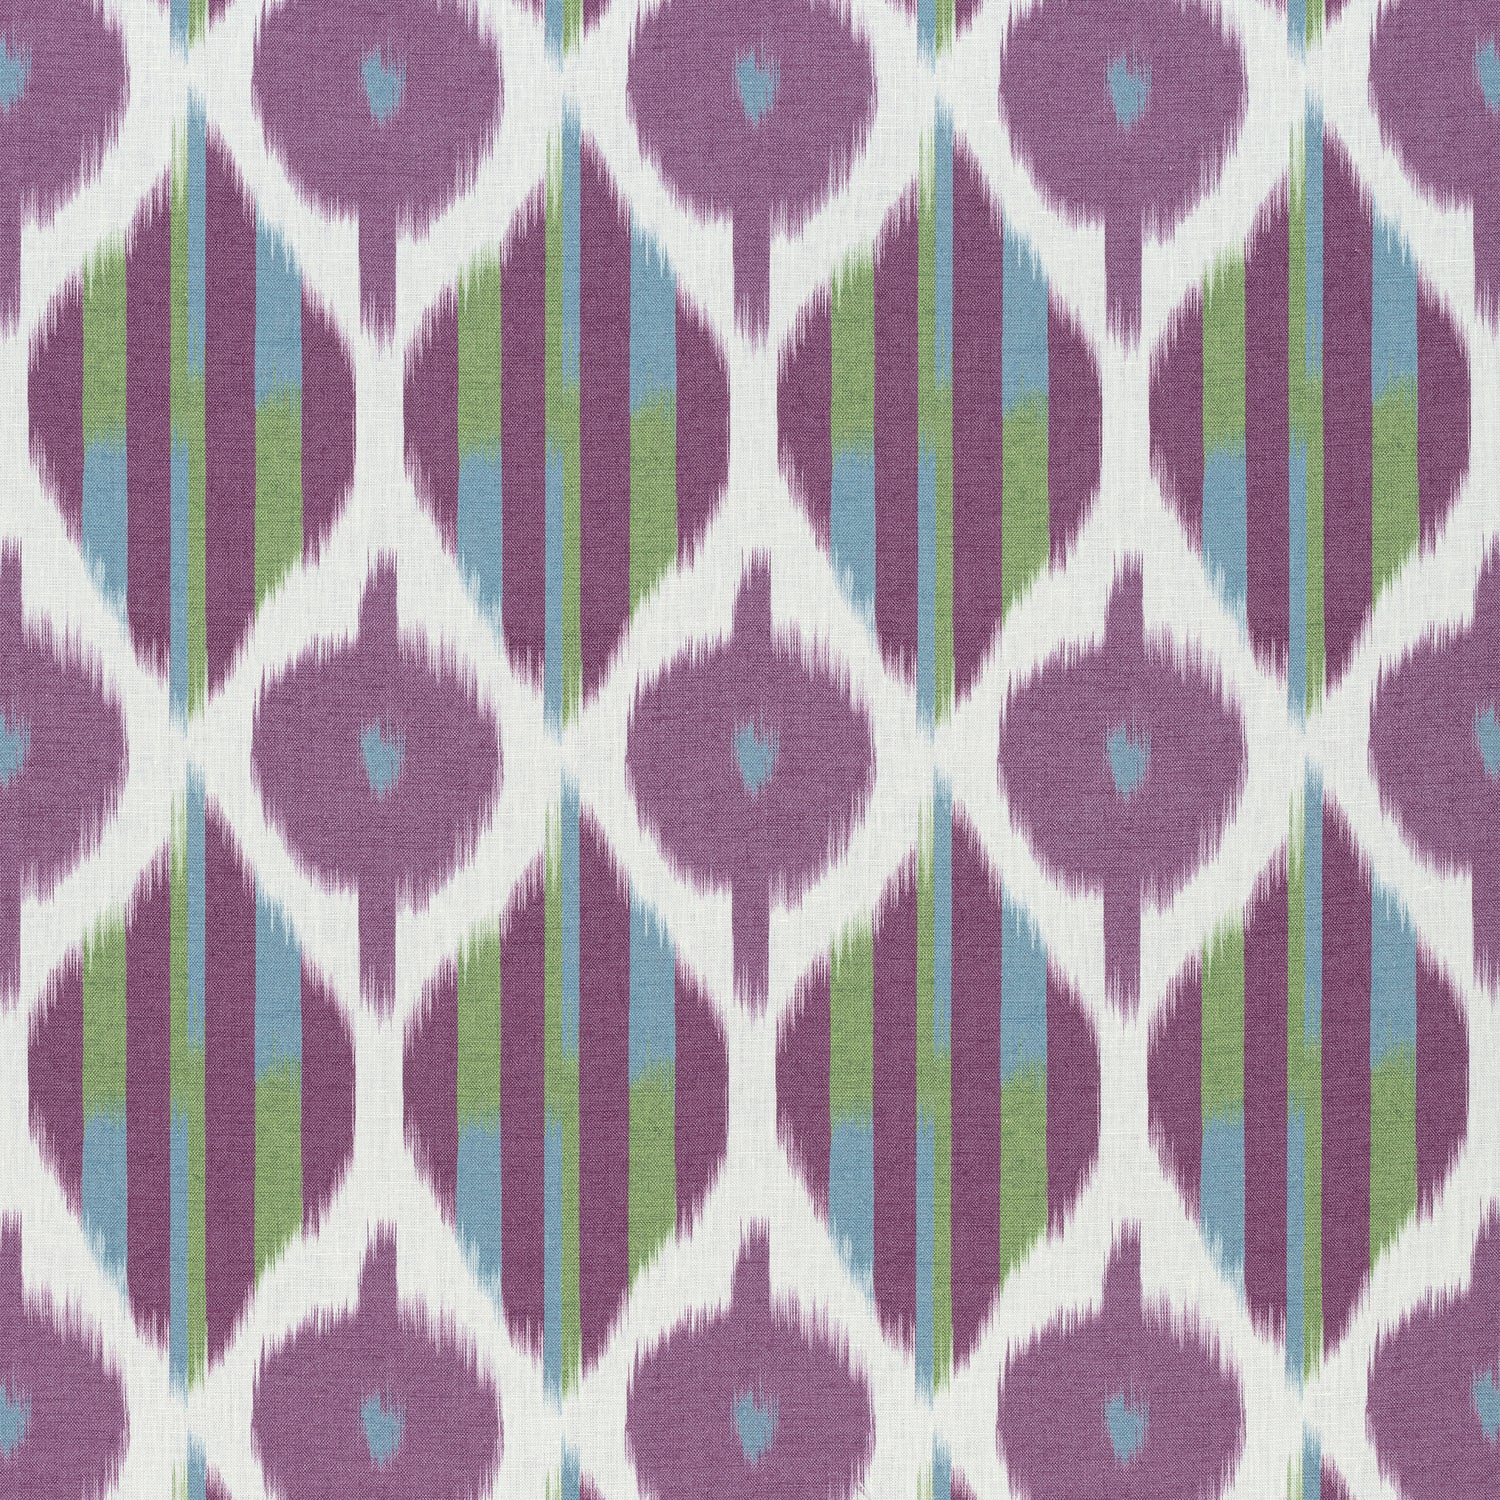 Kimono fabric in eggplant color - pattern number AF9852 - by Anna French in the Nara collection